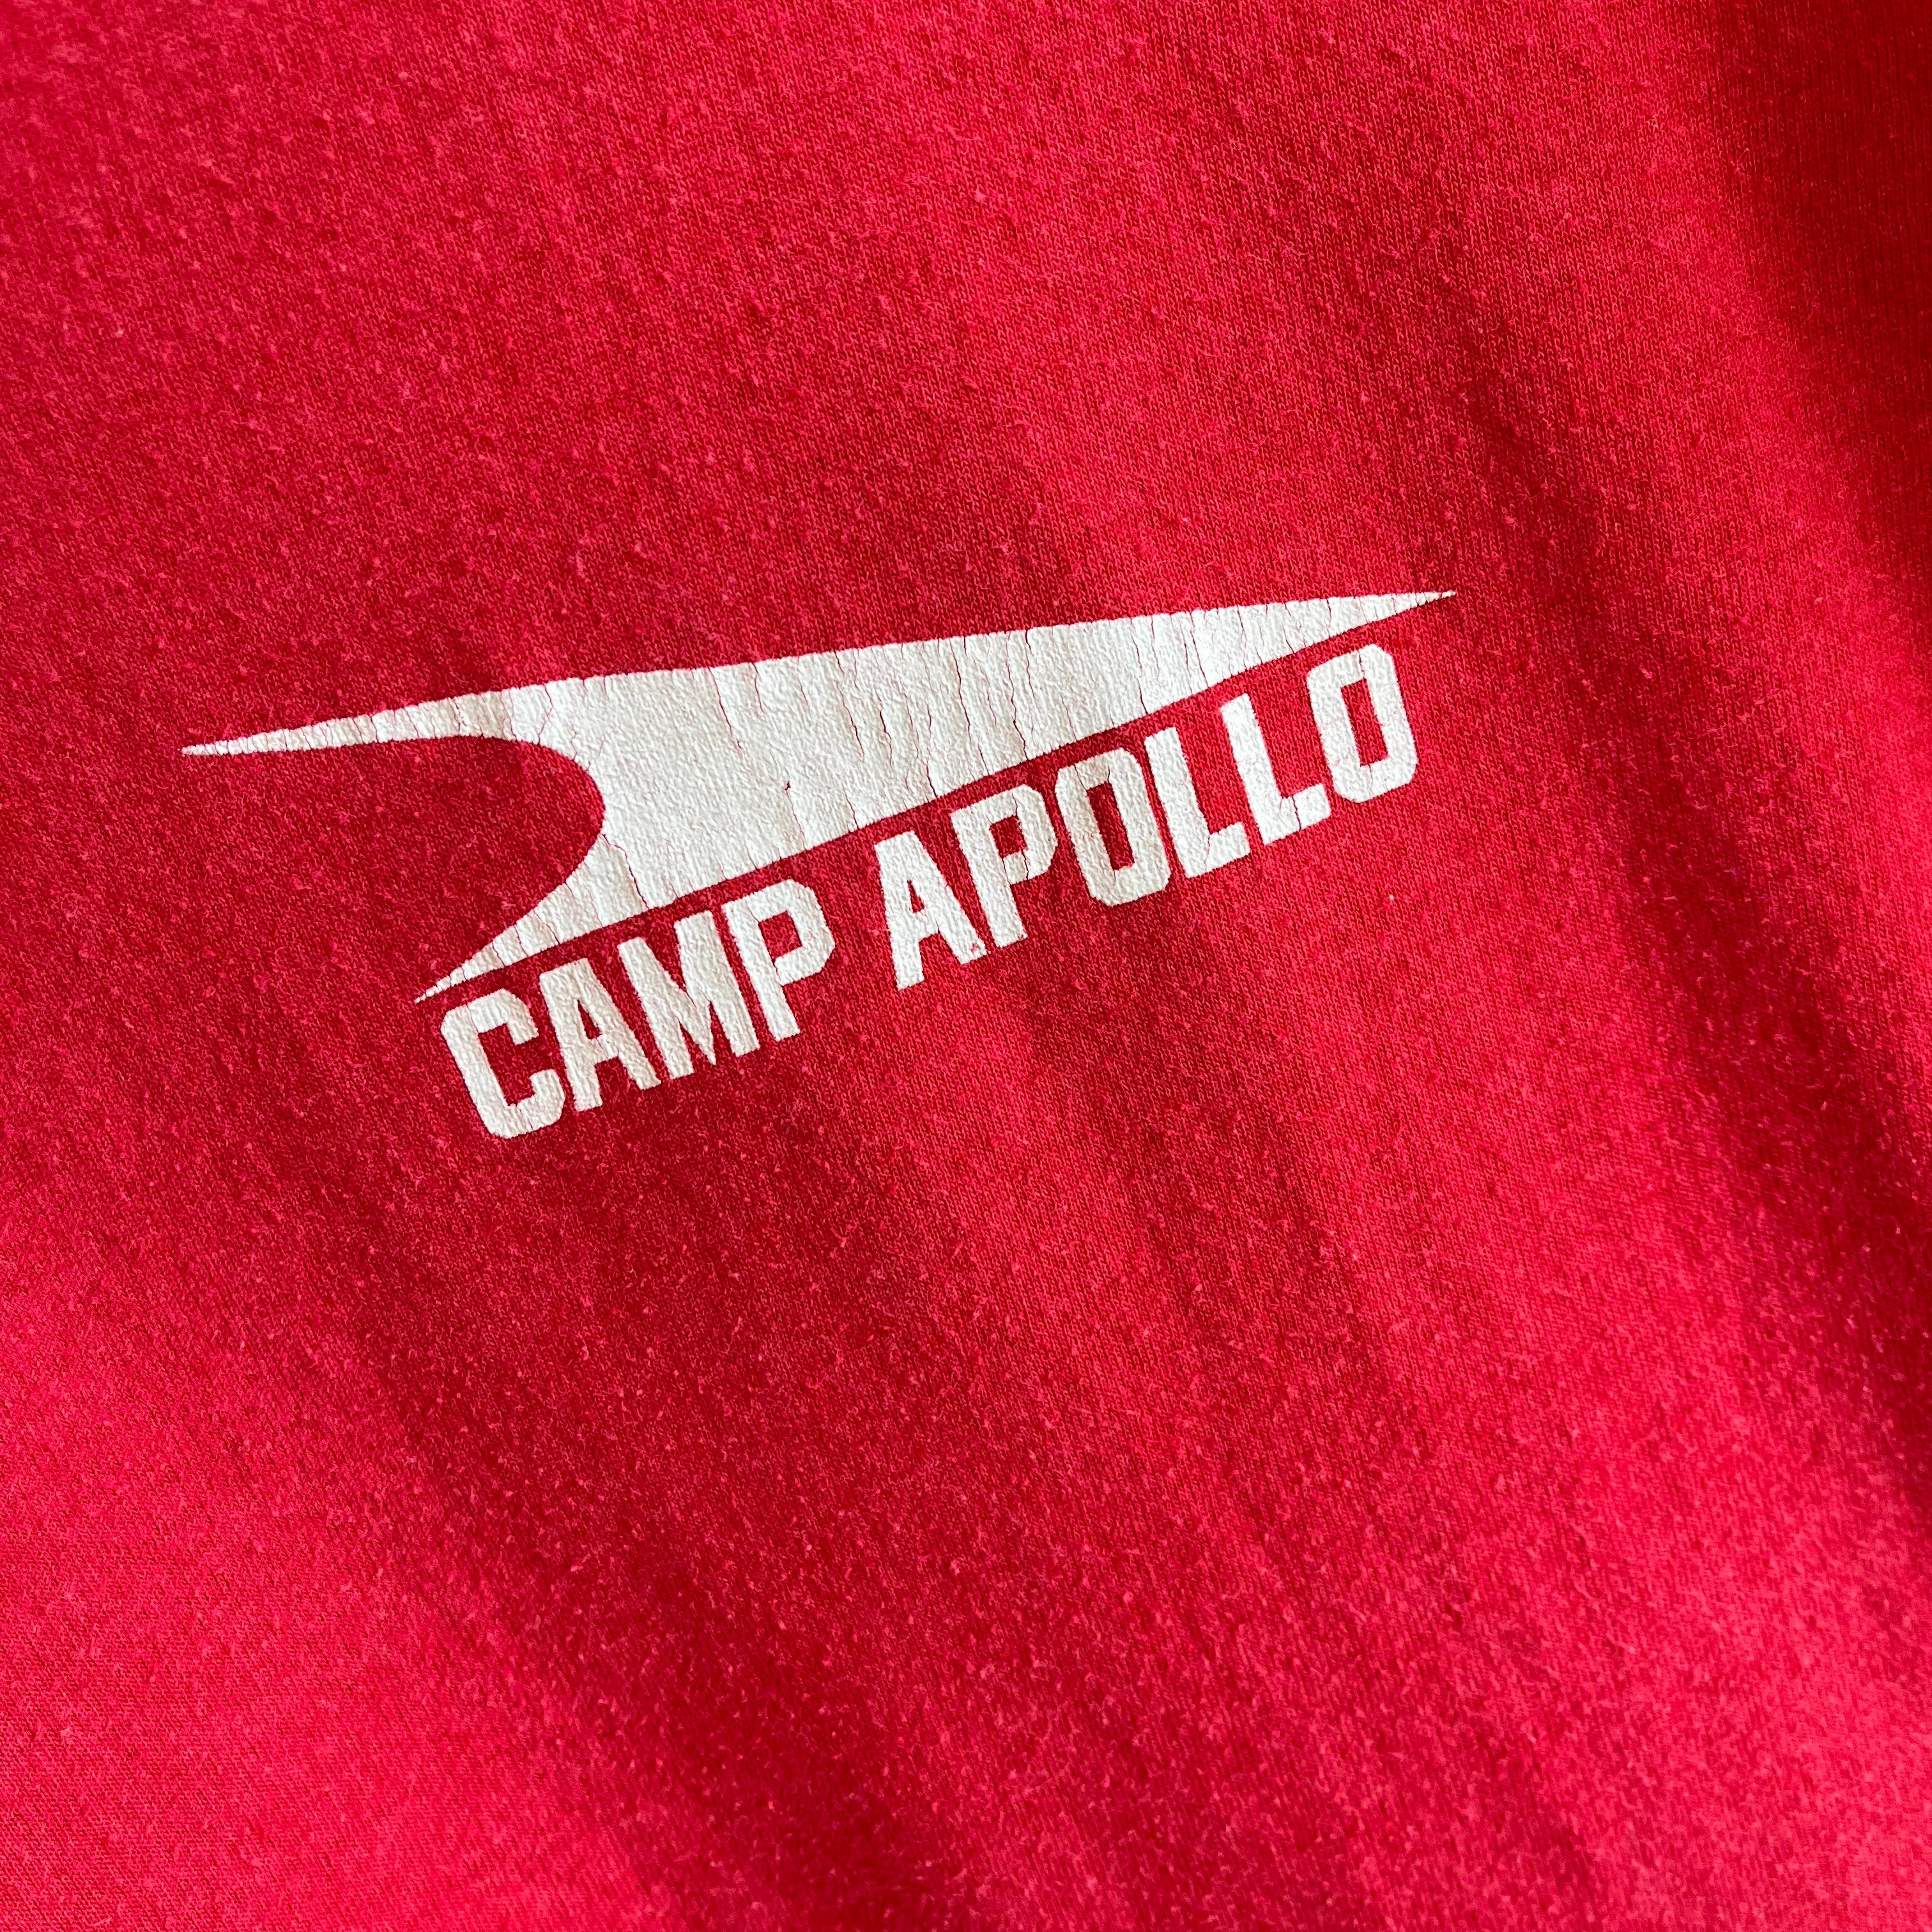 1980s Camp Apollo T-Shirt by Screen Stars